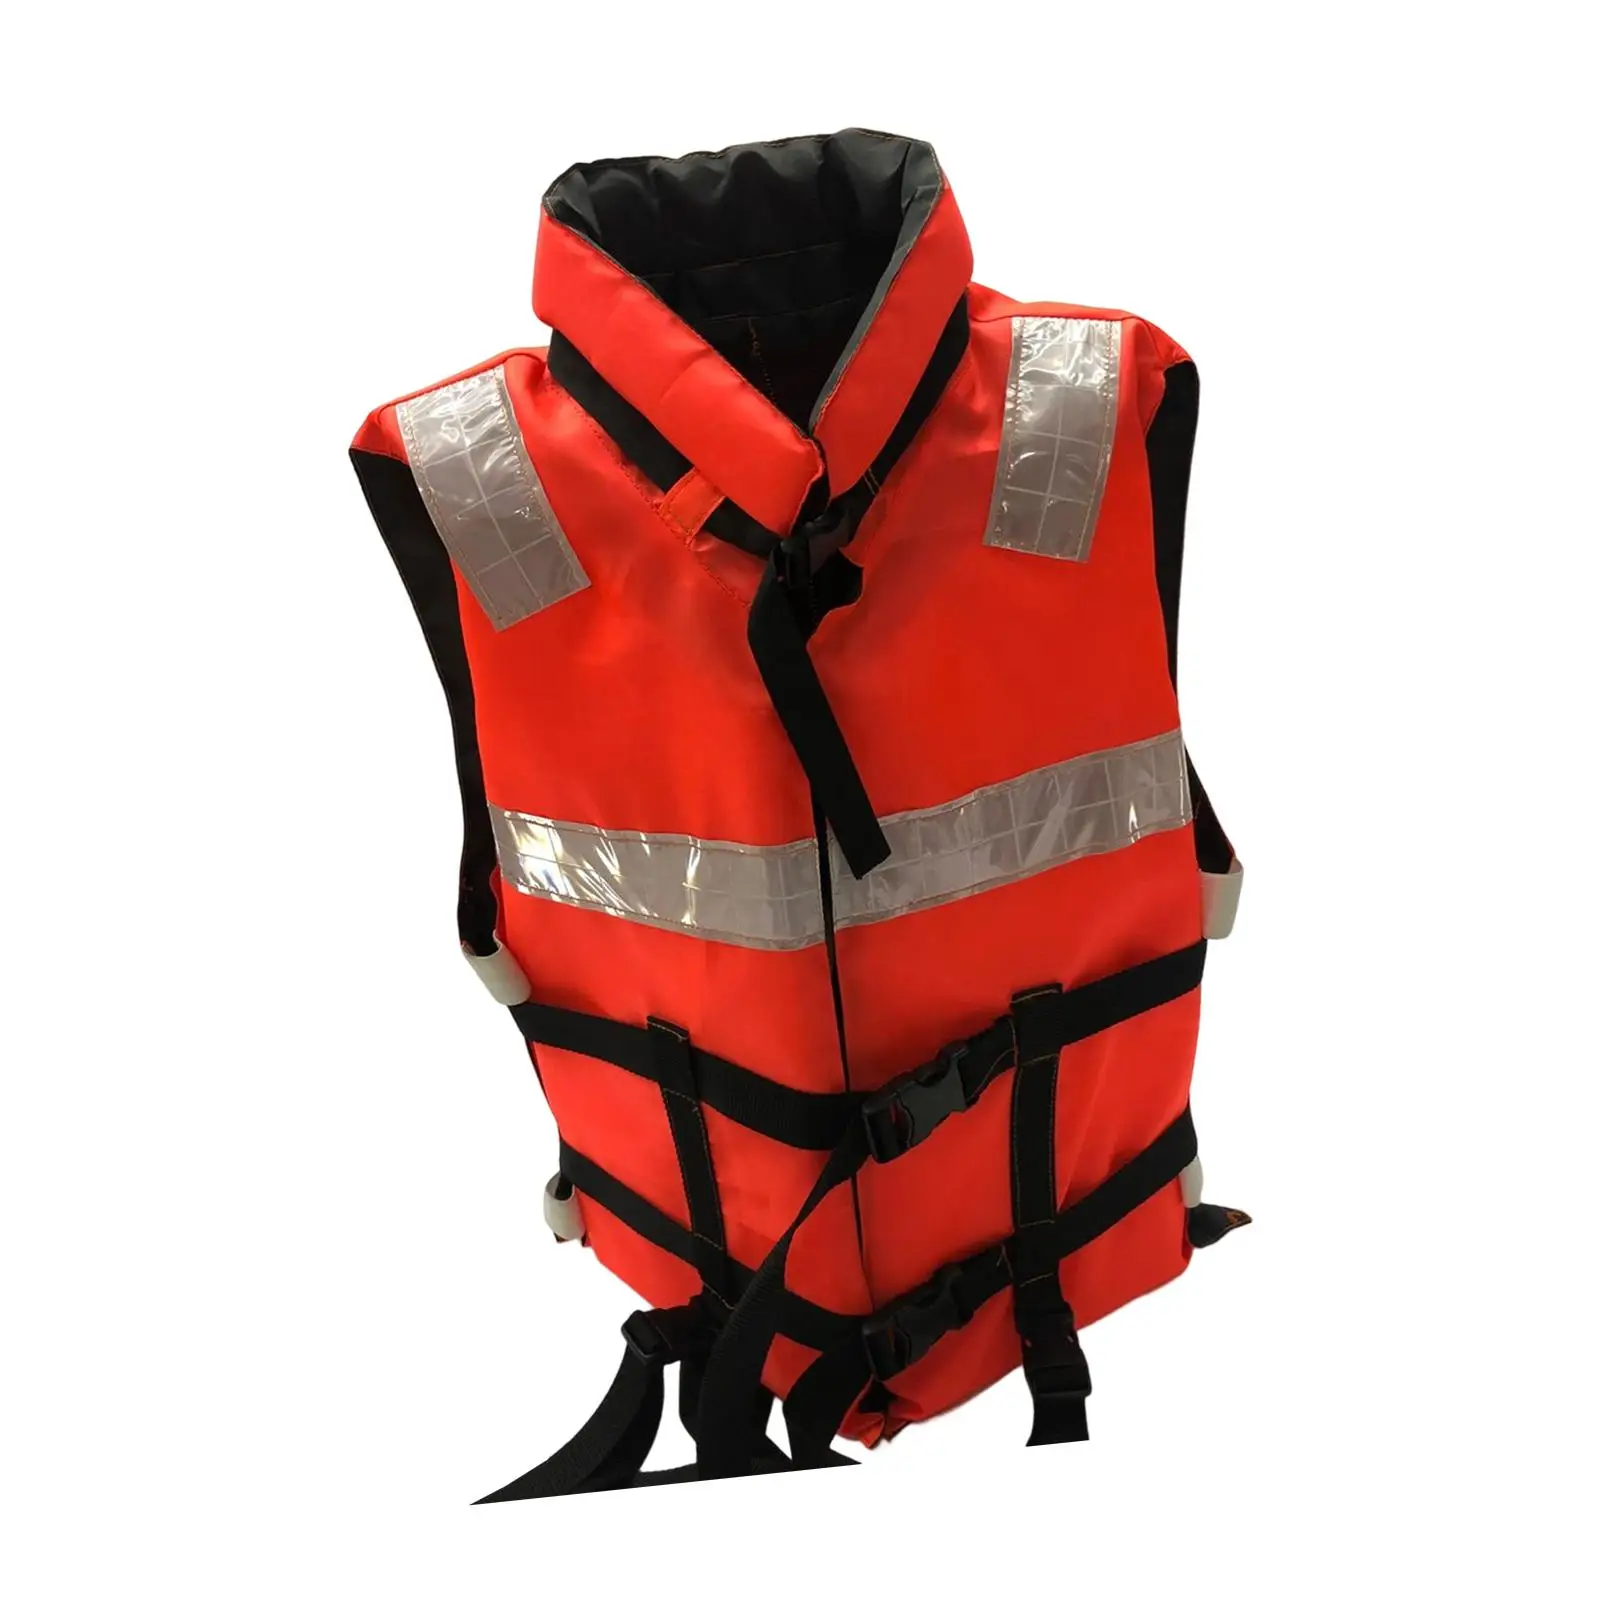 Orange Life Jackets Swimming Vest for Fishing Sailing Elastic and Soft Fabric Back Double Webbing Skin Friendly Comfortable